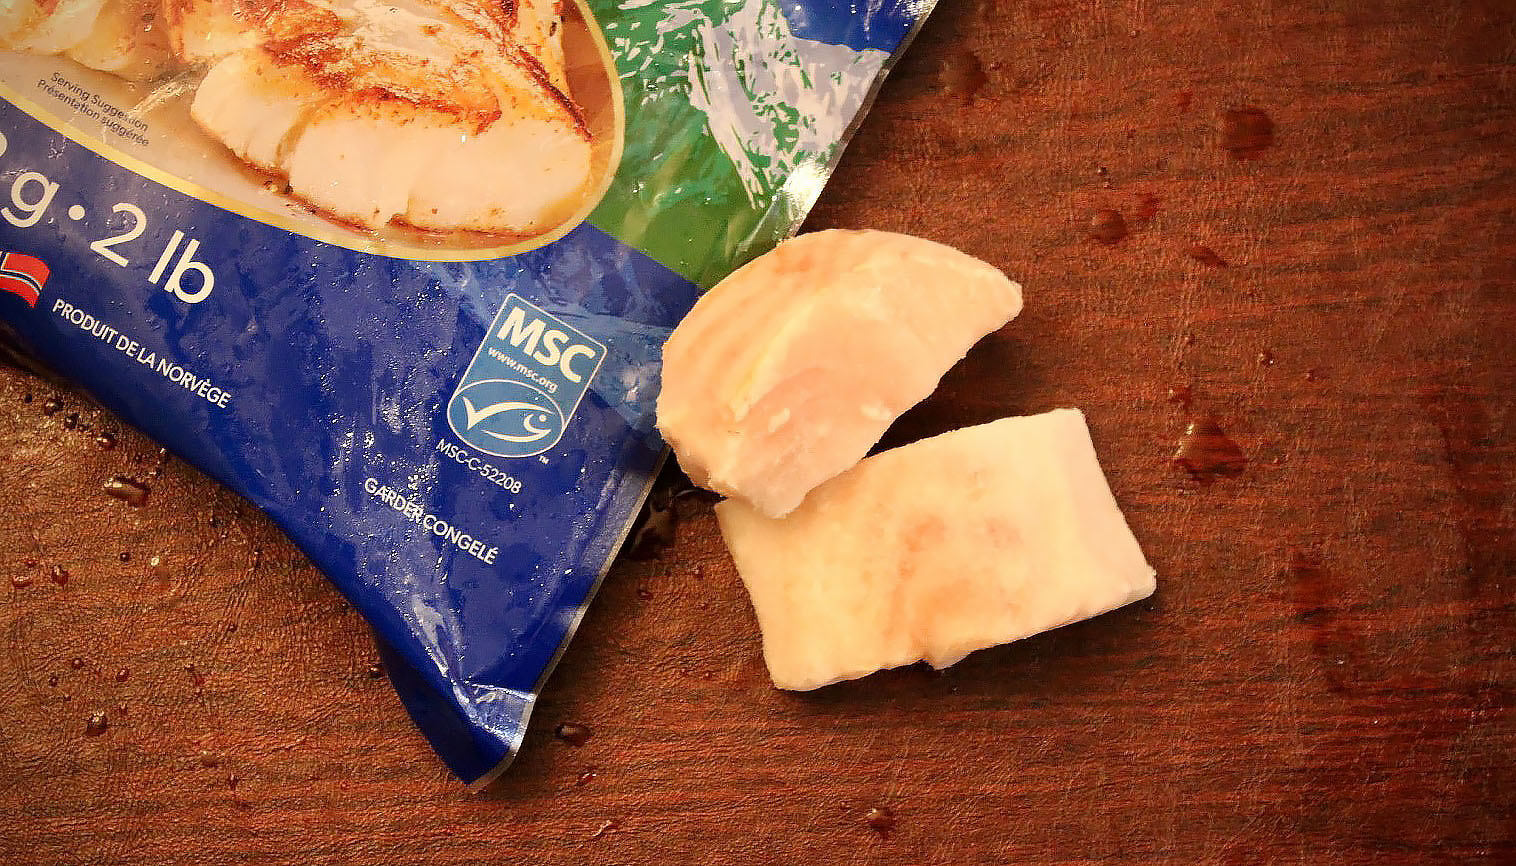 A package of frozen fish with the MSC label sits on a table